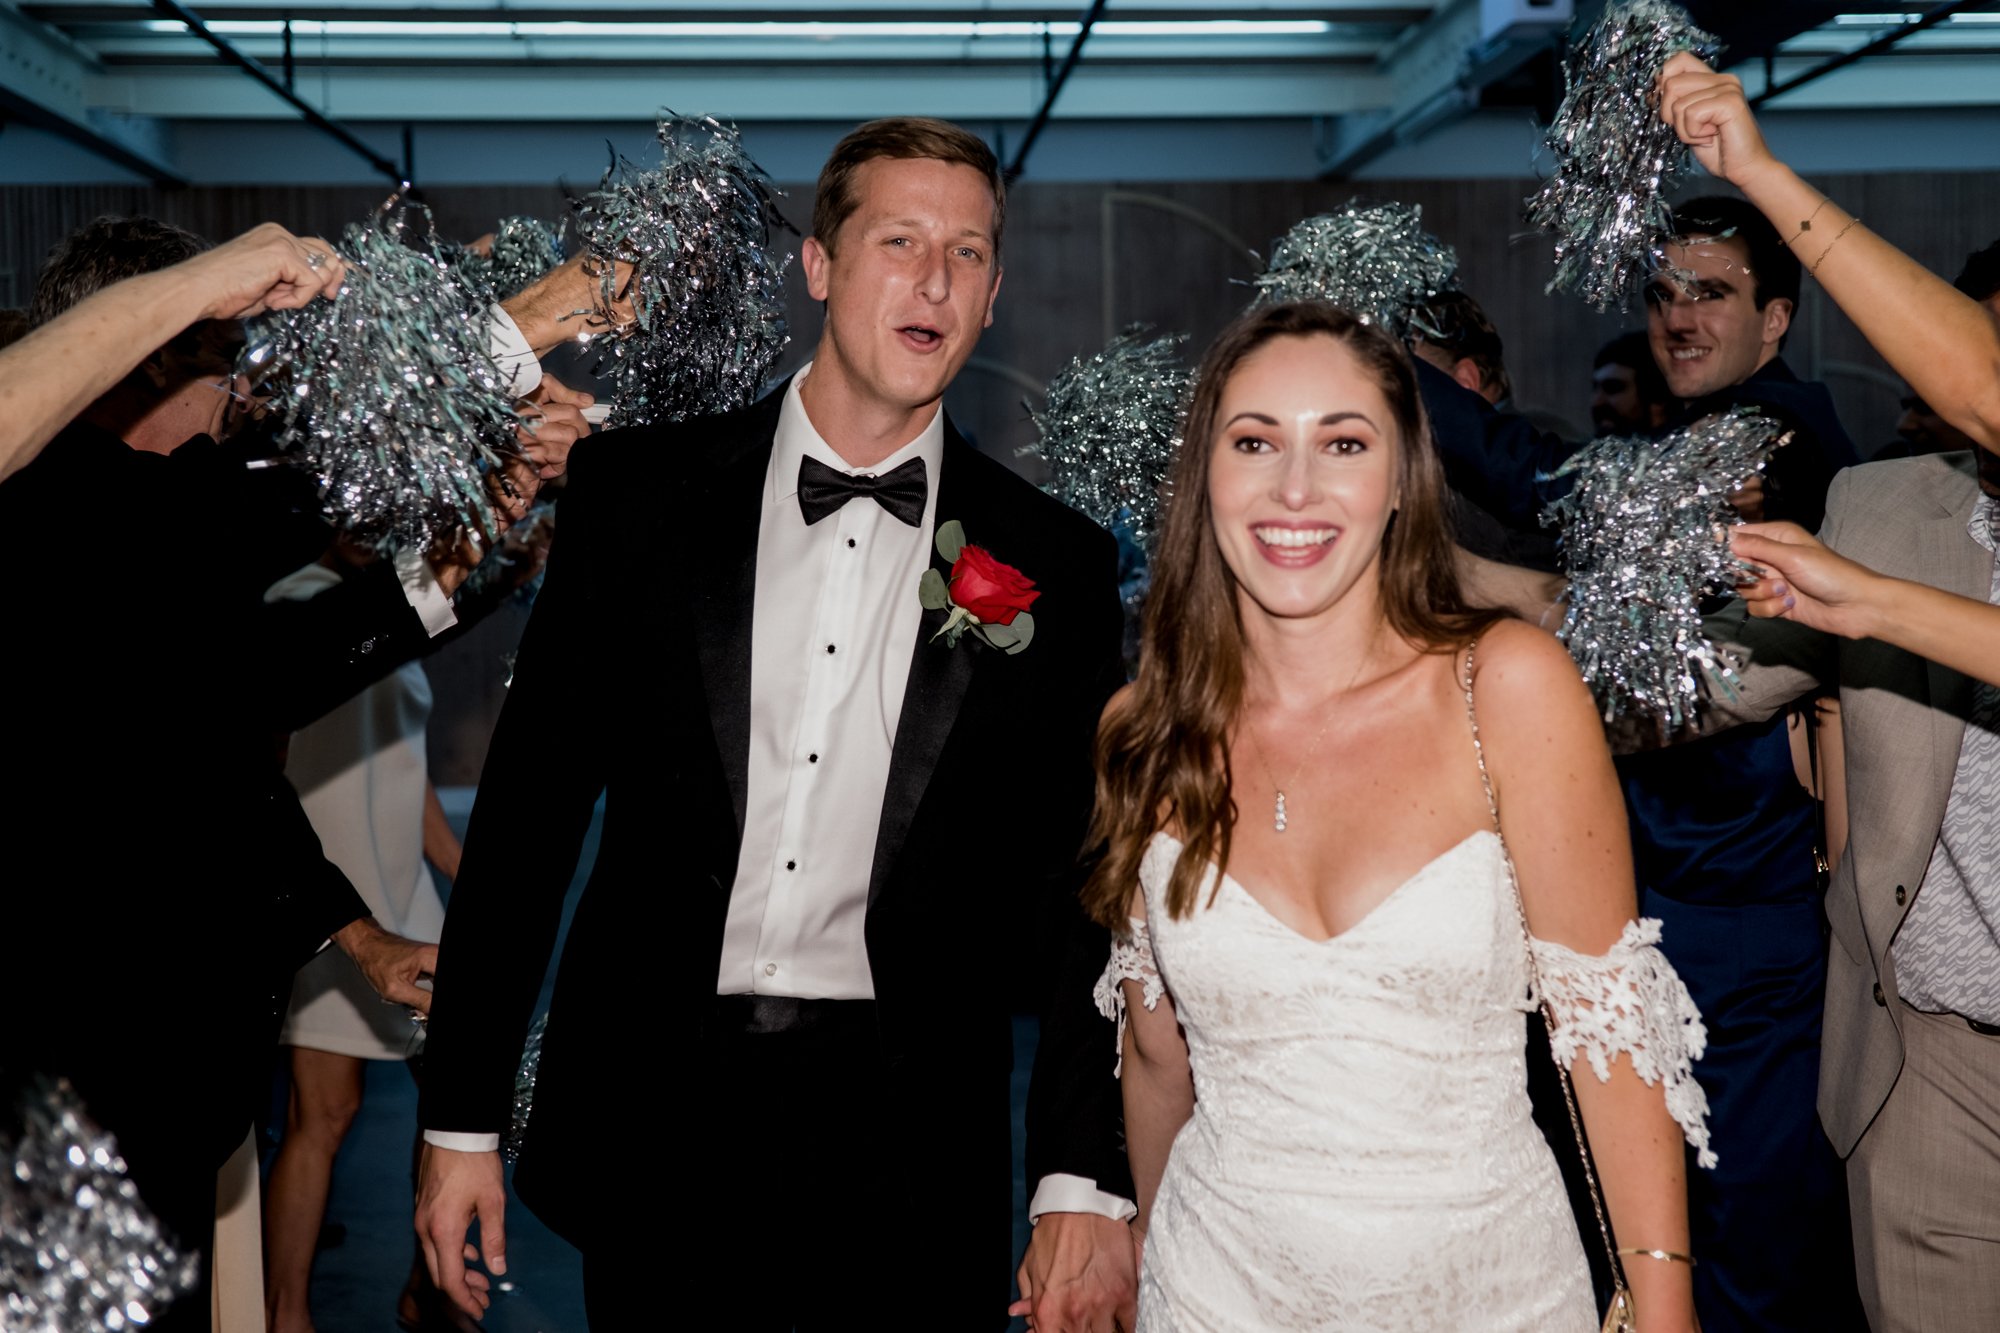 Grand exit bride and groom send off with silver pom poms at Ronin Harrisburg